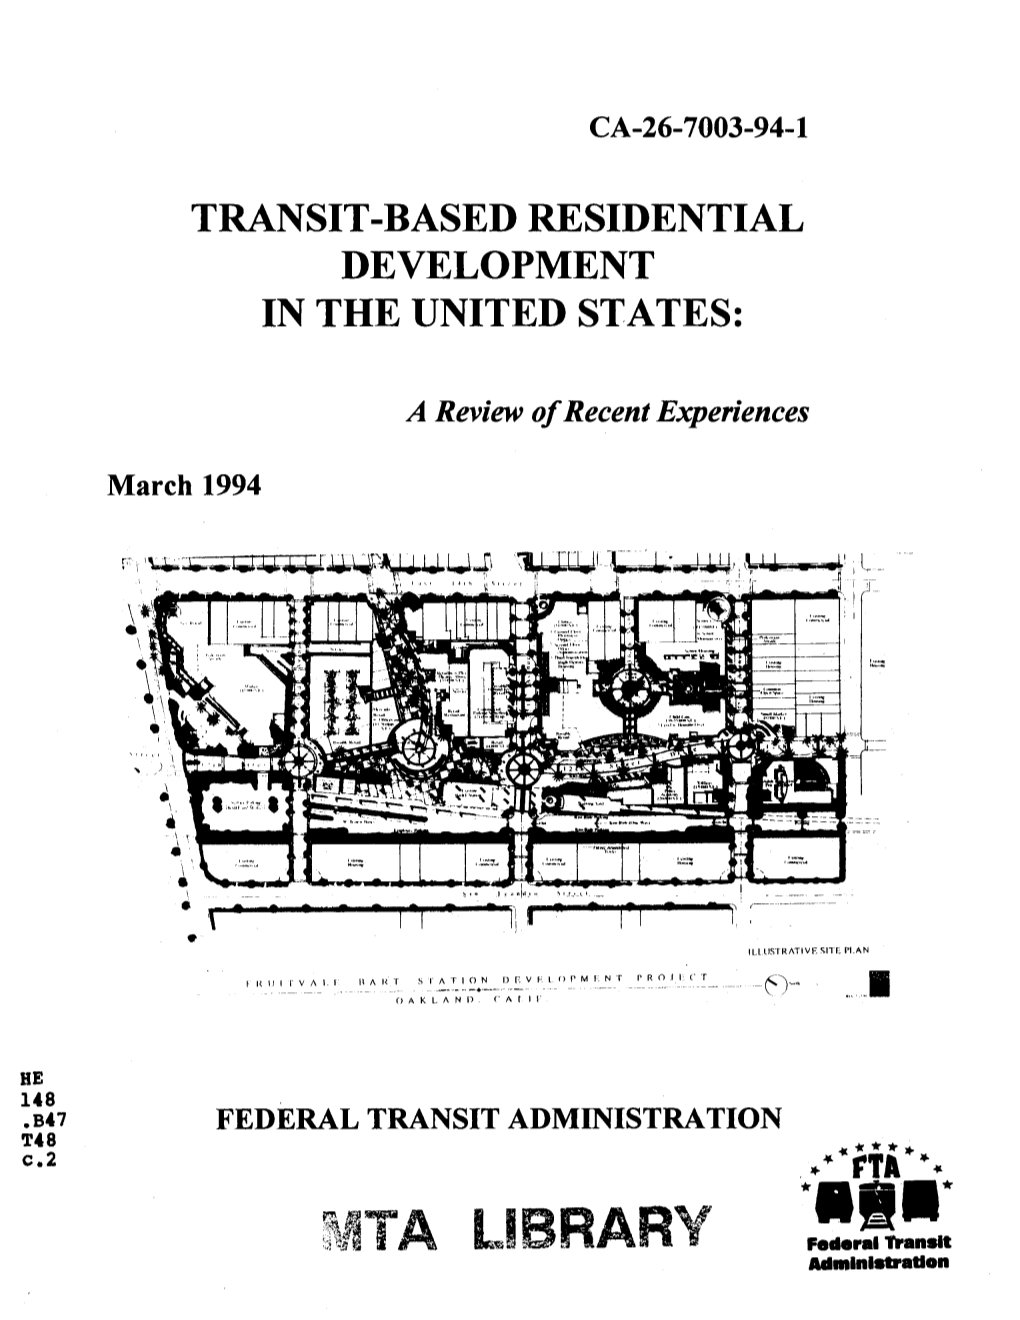 Transit-Based Residential Development in the United States